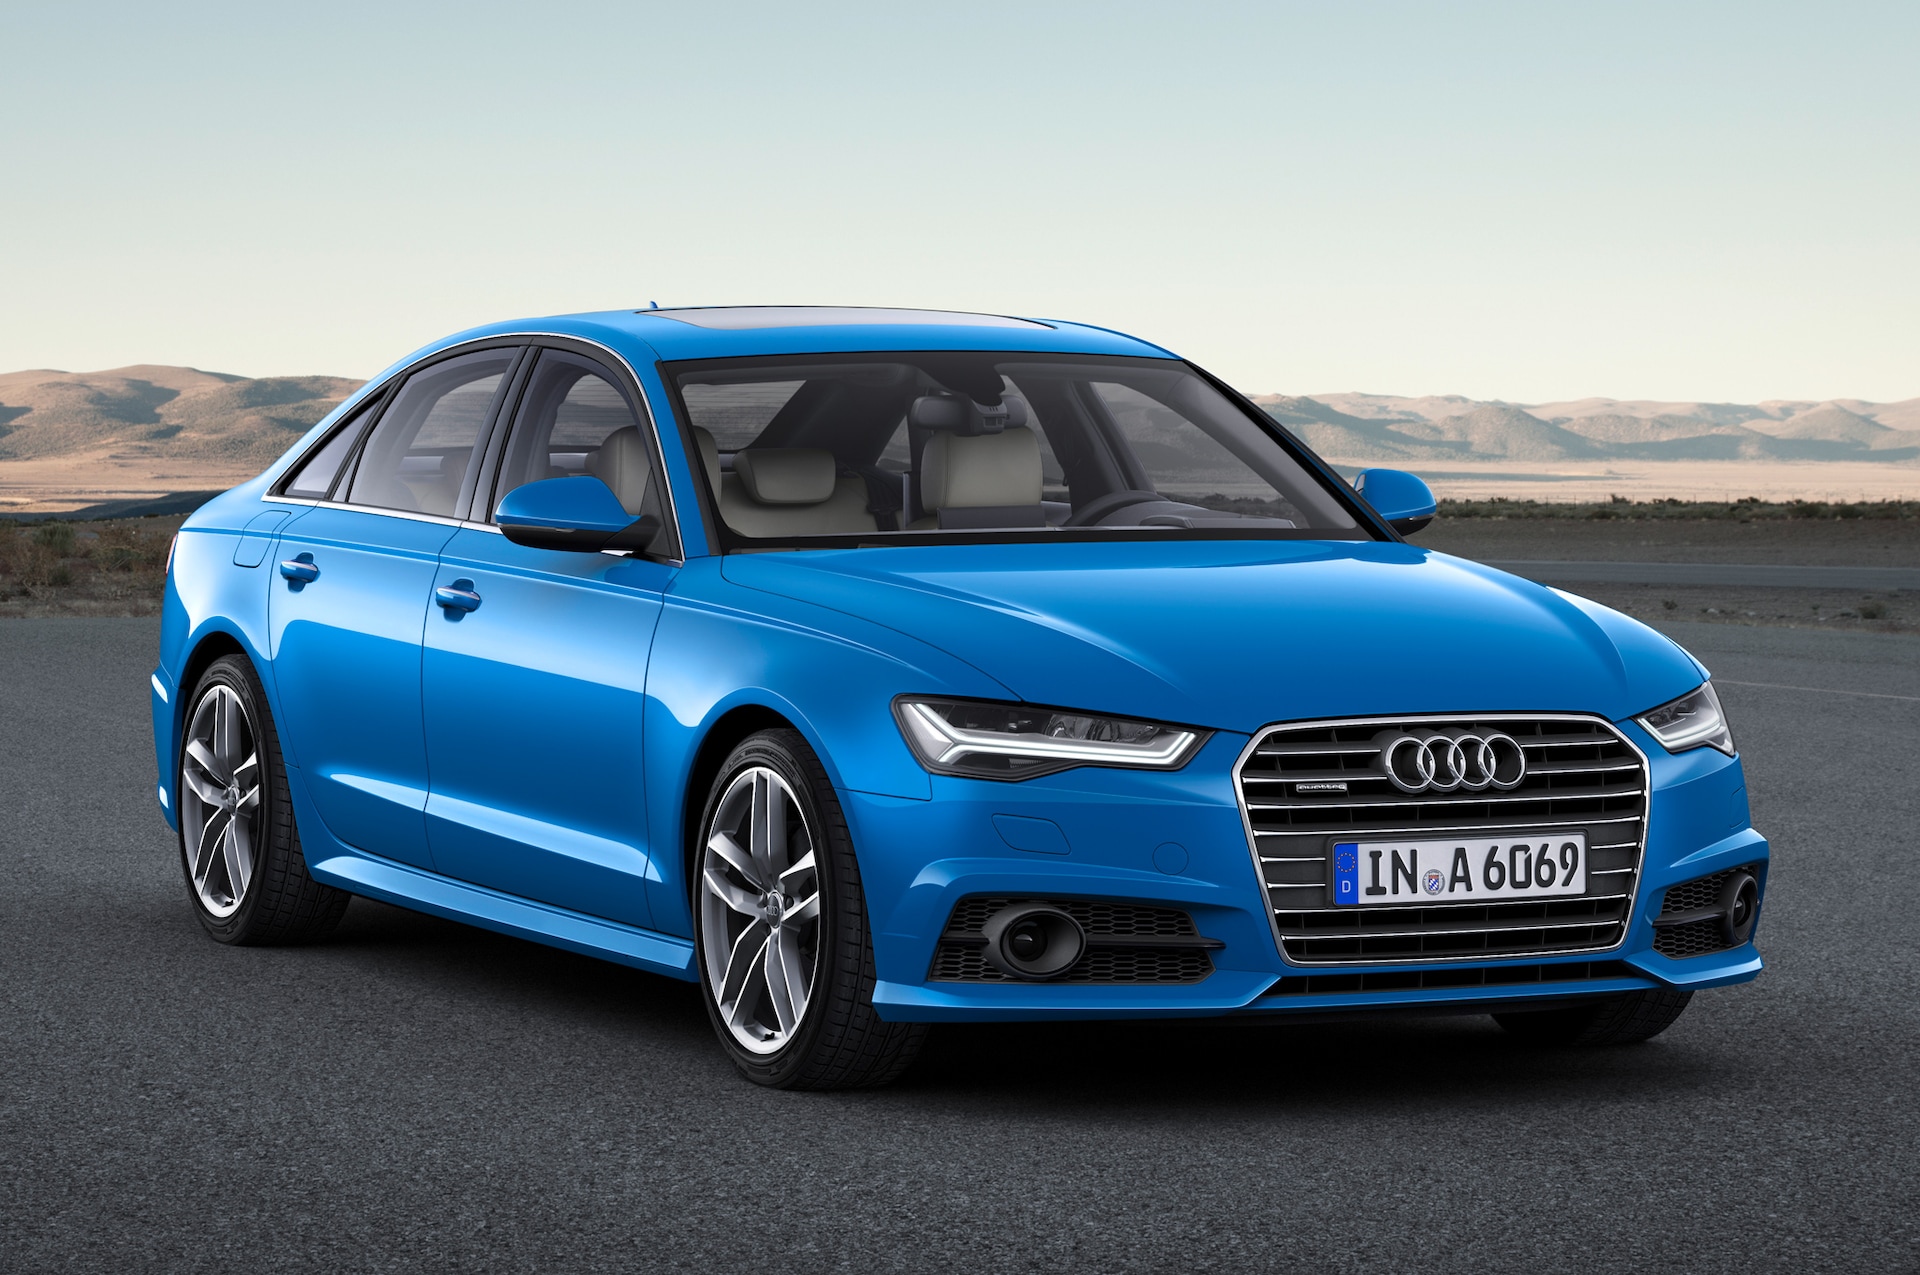 2017 Audi A6 and A7 Gain New Tech and Mild Exterior Styling Tweaks